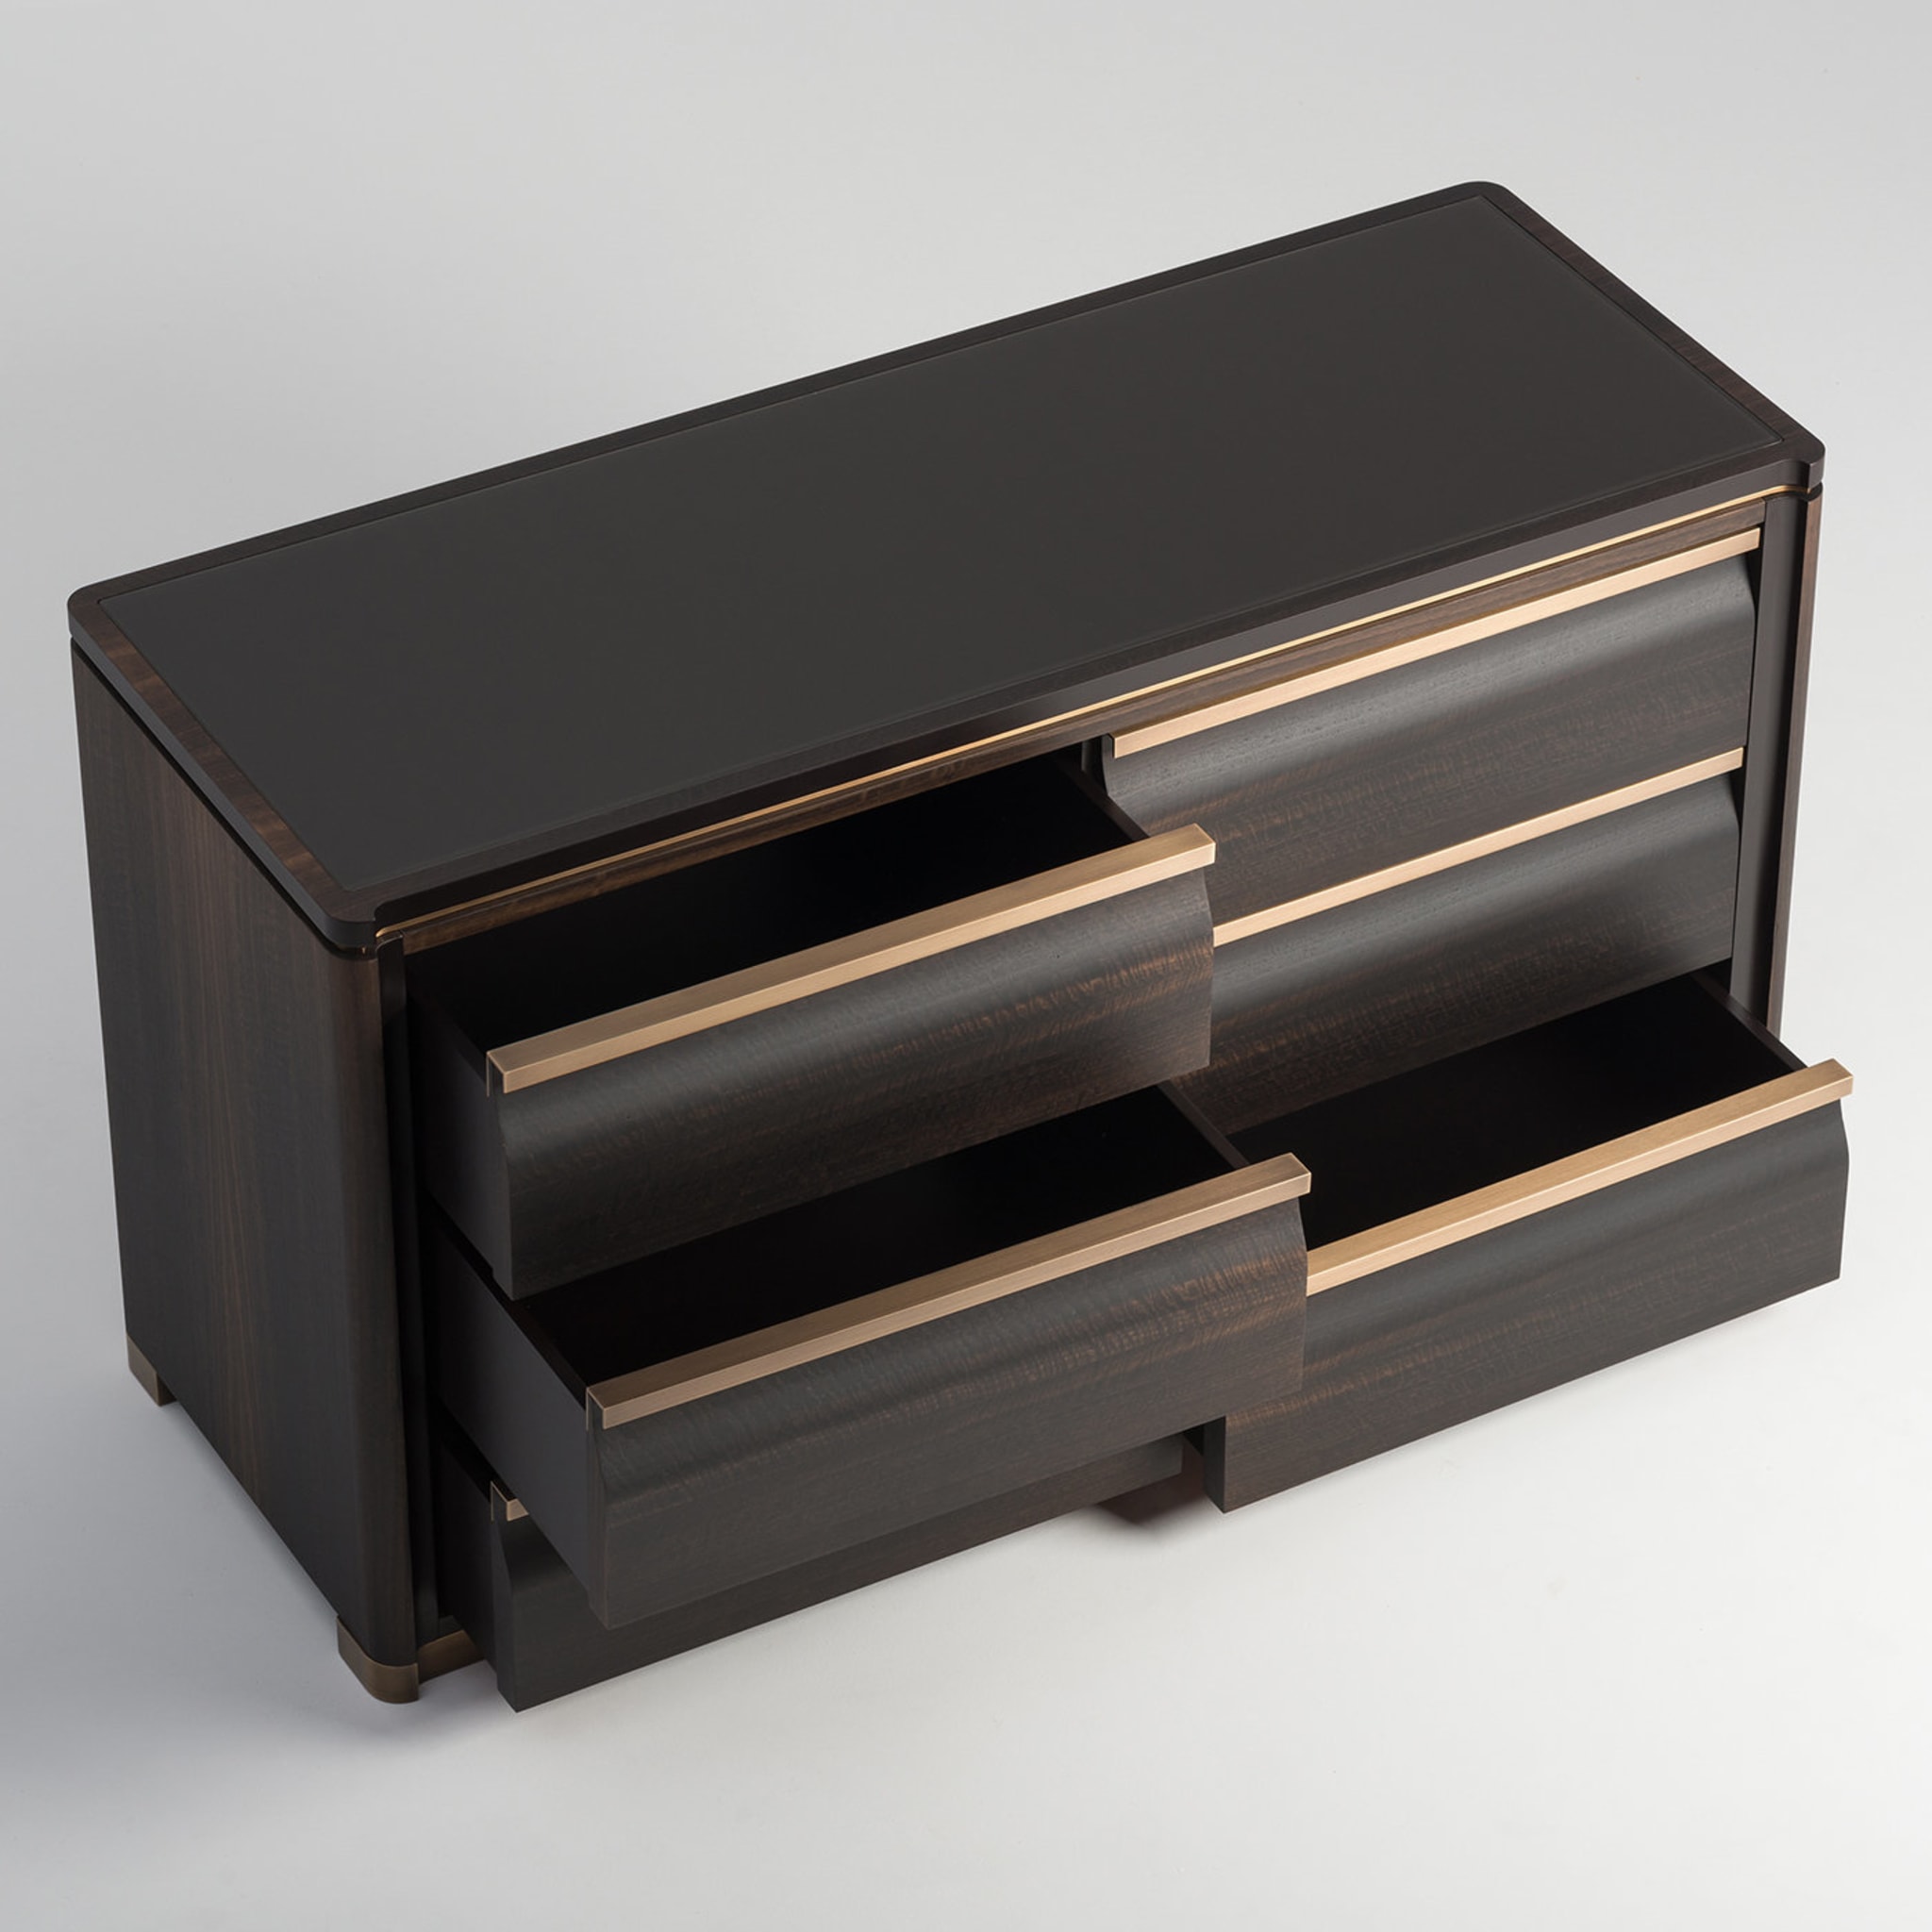 Ercole chest of drawers by Marco and Giulio Mantellassi - Alternative view 1